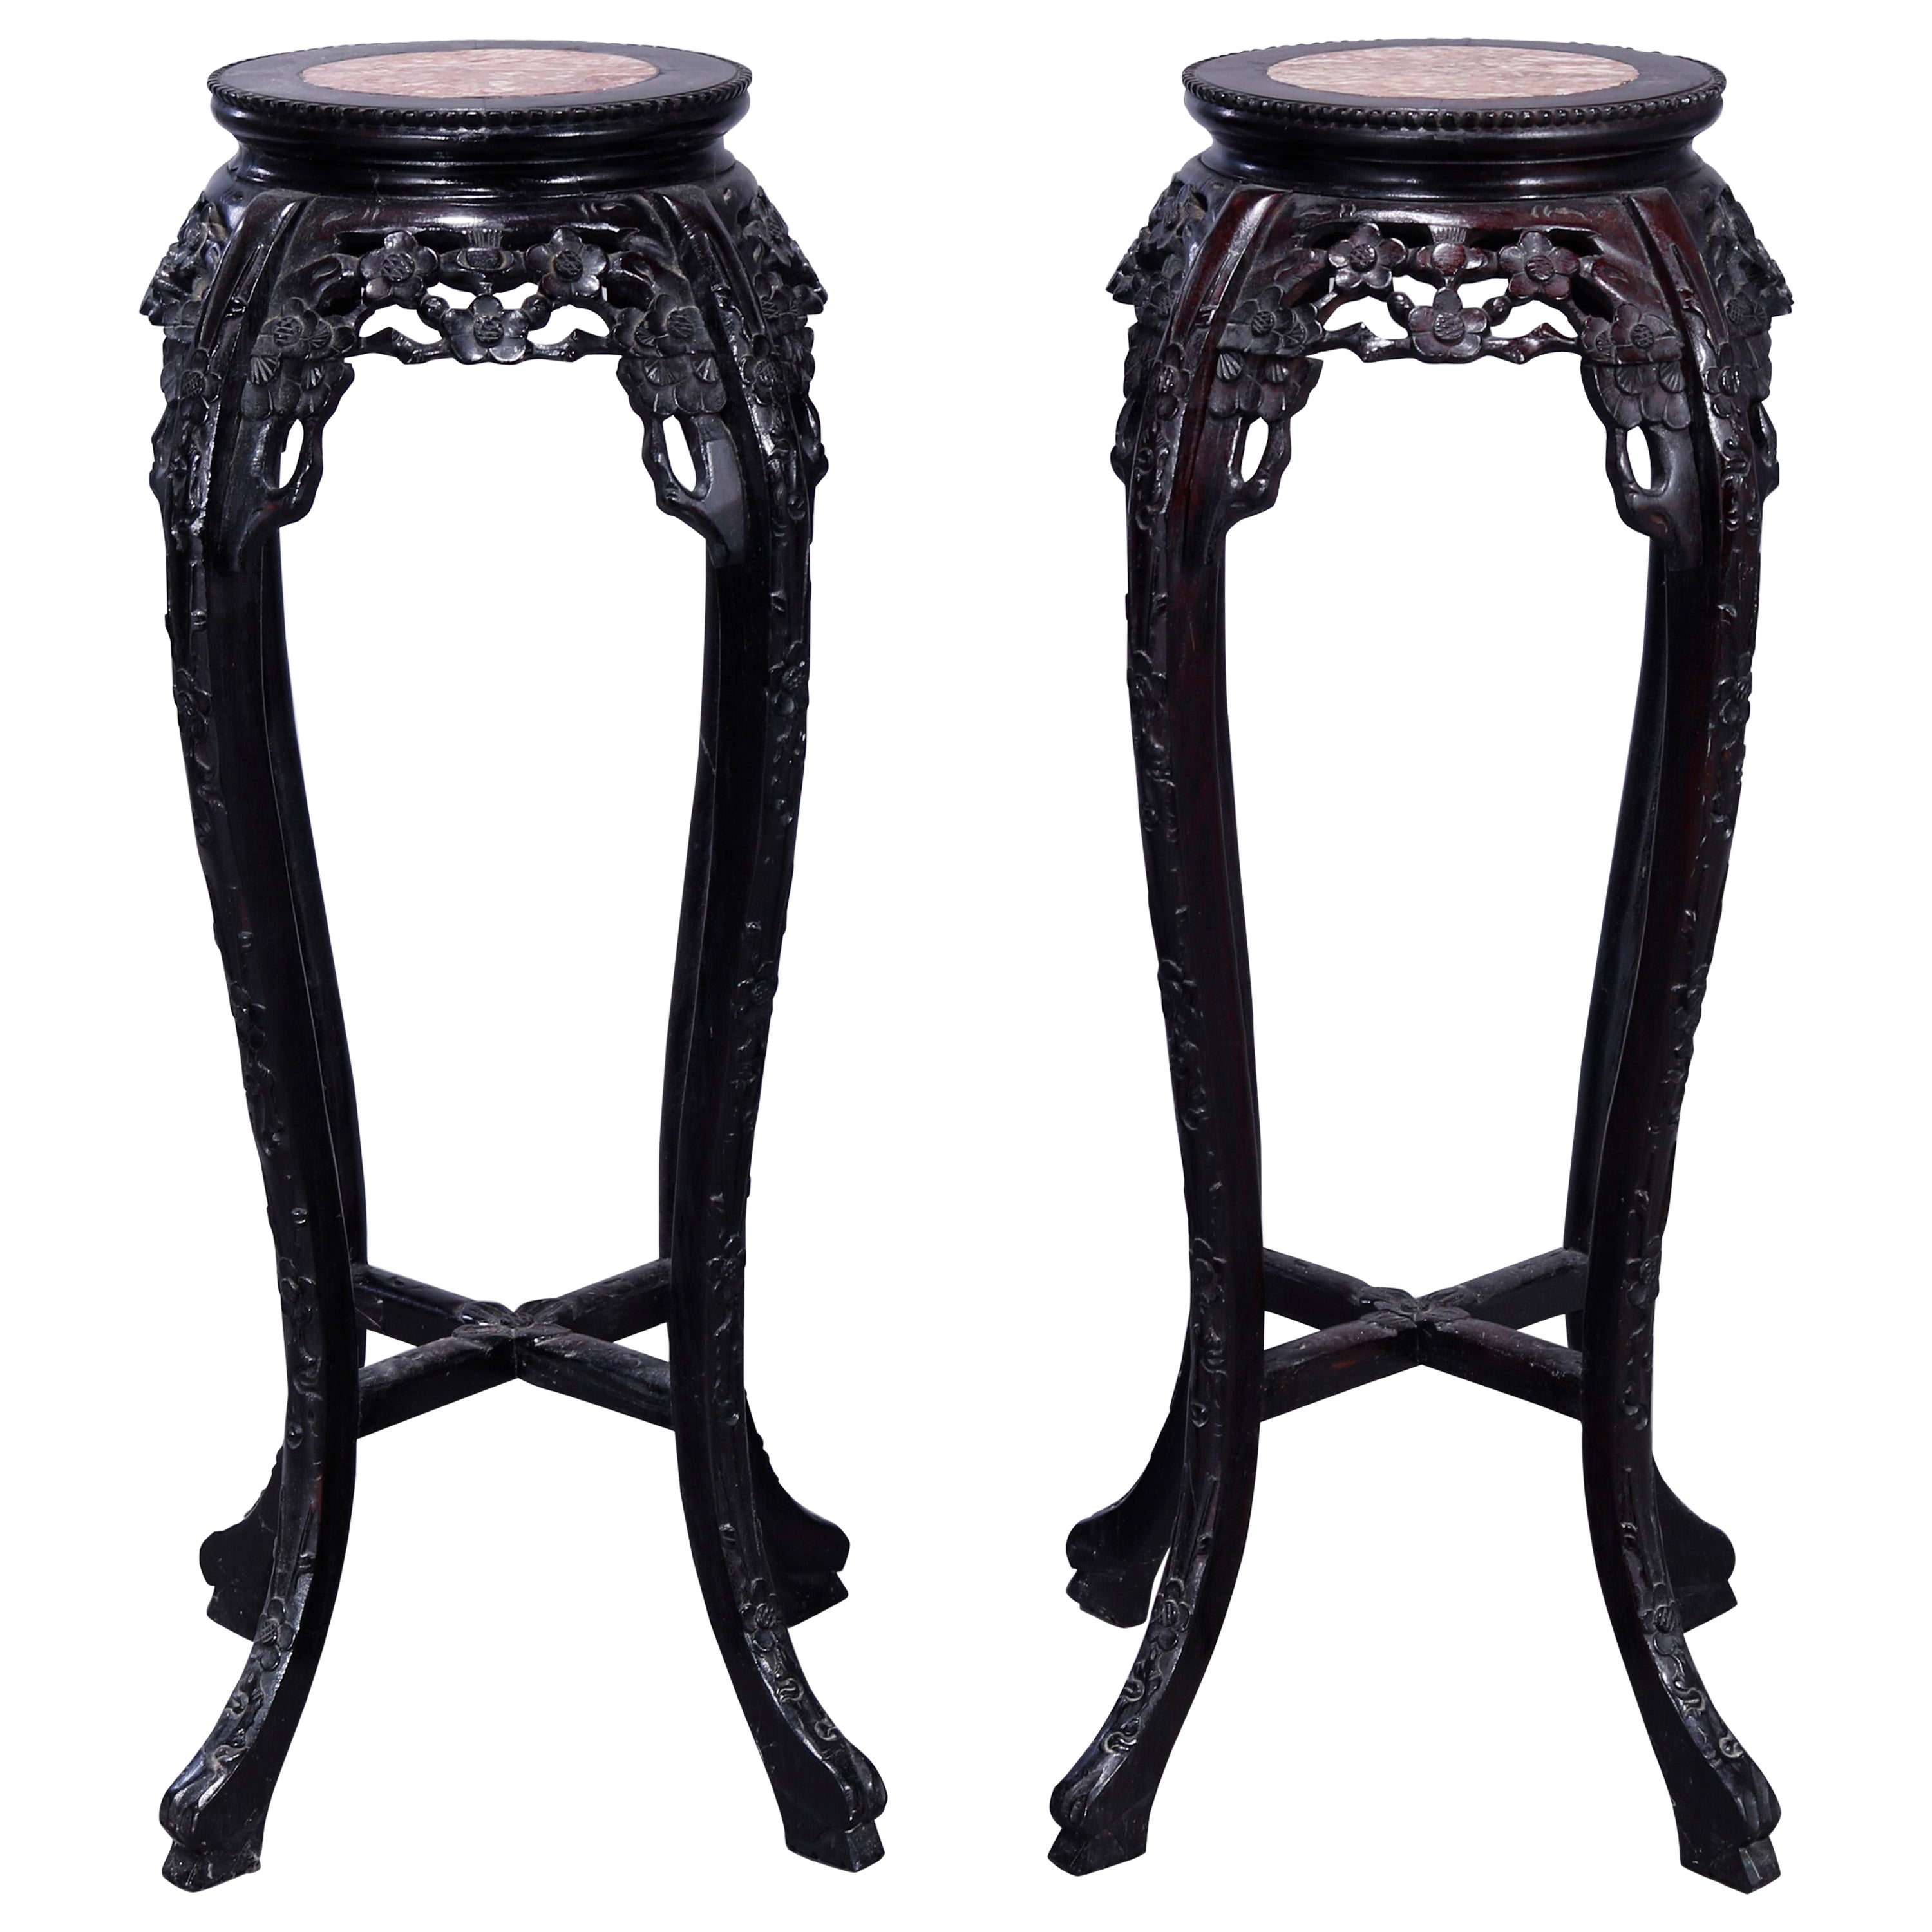 Matching Pair Chinese Carved Hardwood Marble Top Plant Stands, 20th C